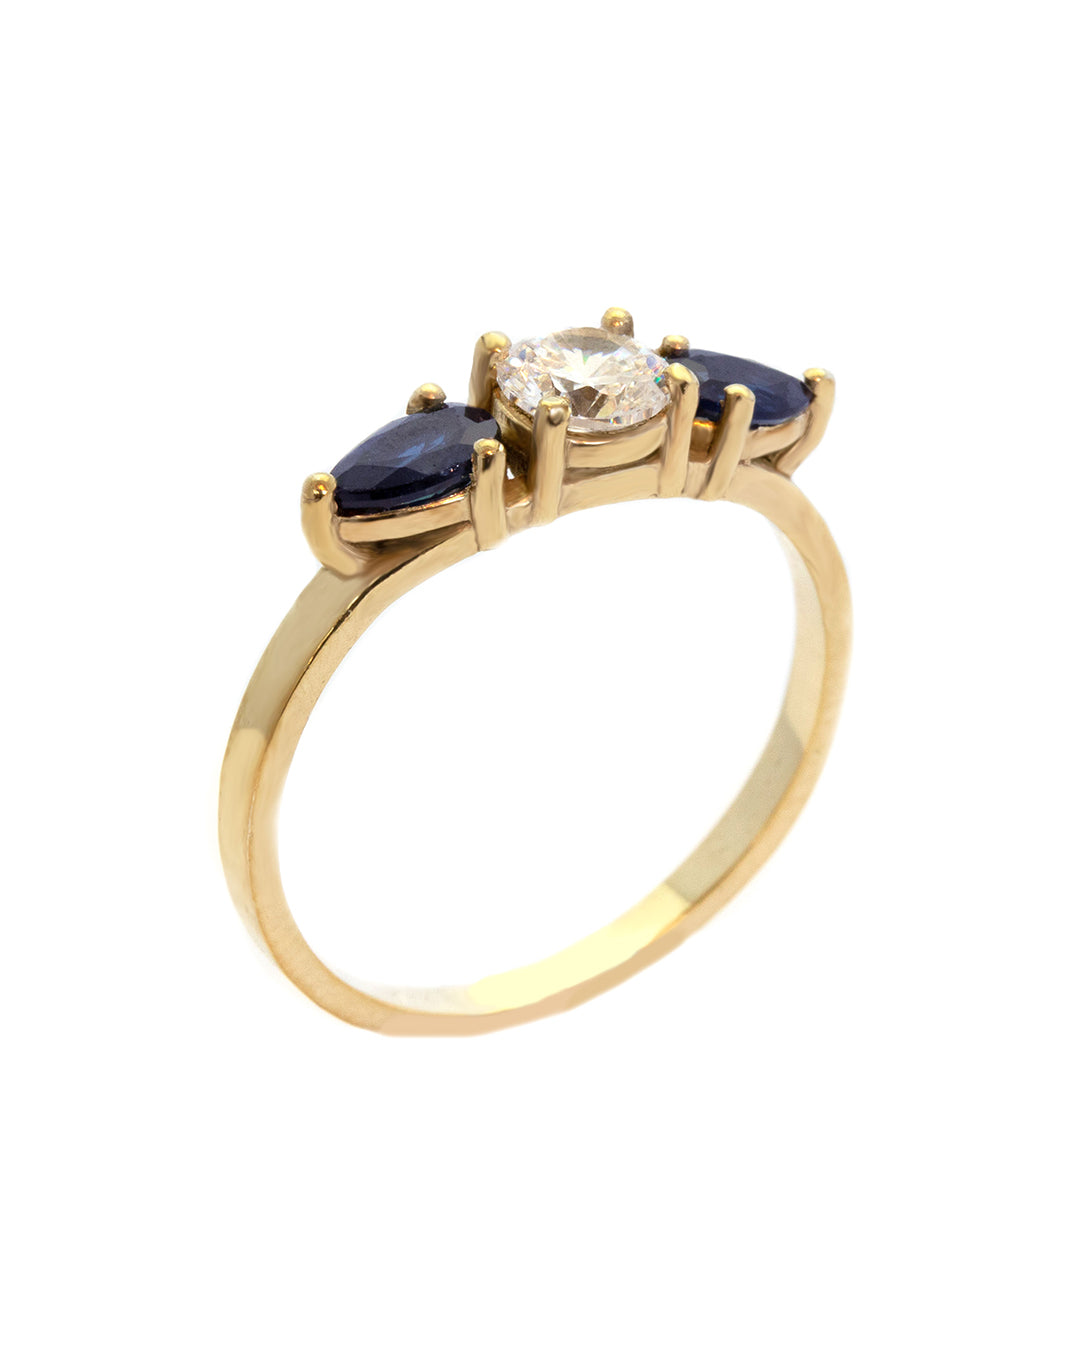 Blues Sapphire and Diamond Ring with a Lab Grown Diamond